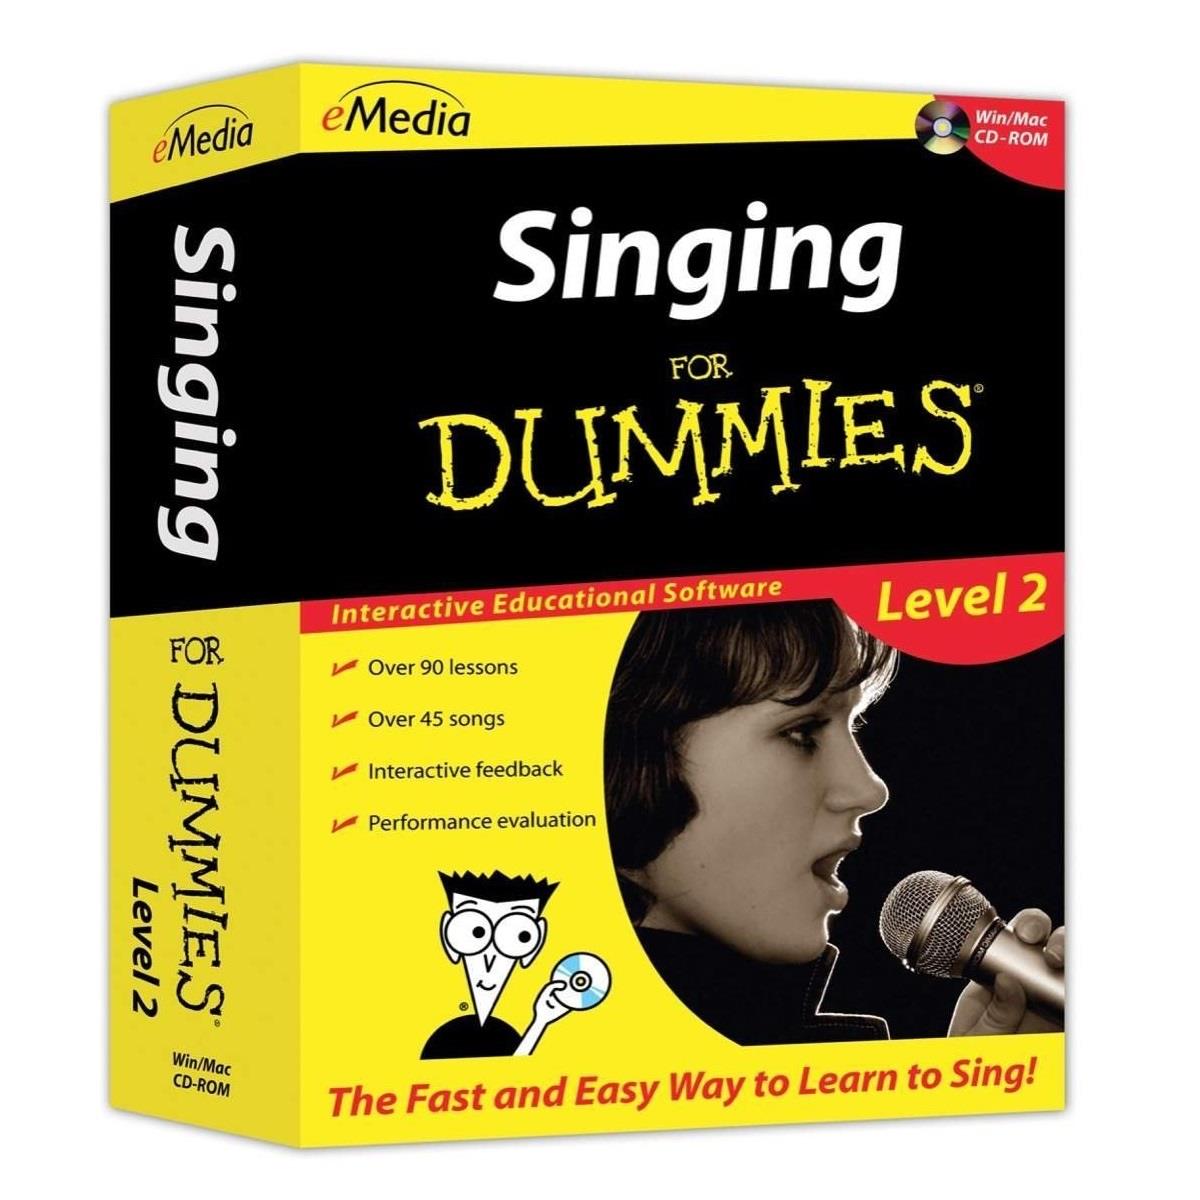 eMedia Singing For Dummies Level 2 Software for Windows, Electronic Download -  FD09144DLW